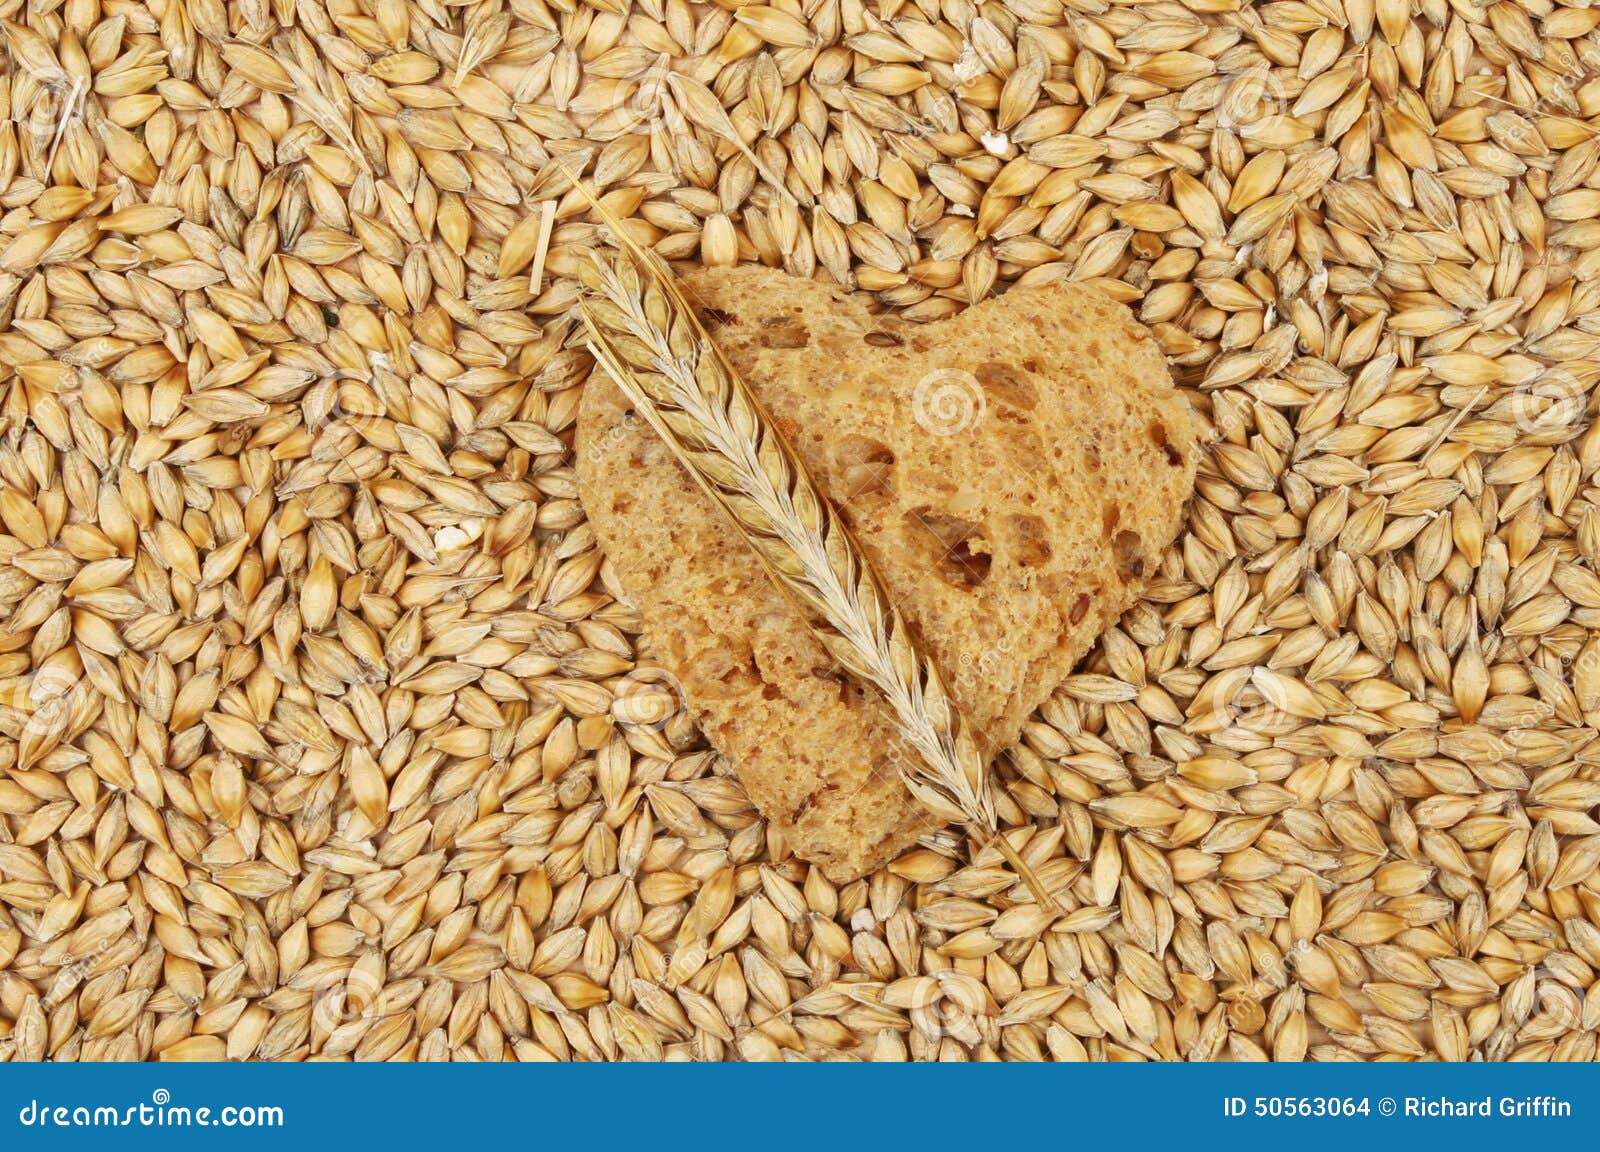 Barley and bread heart stock photo. Image of seed, brown - 50563064